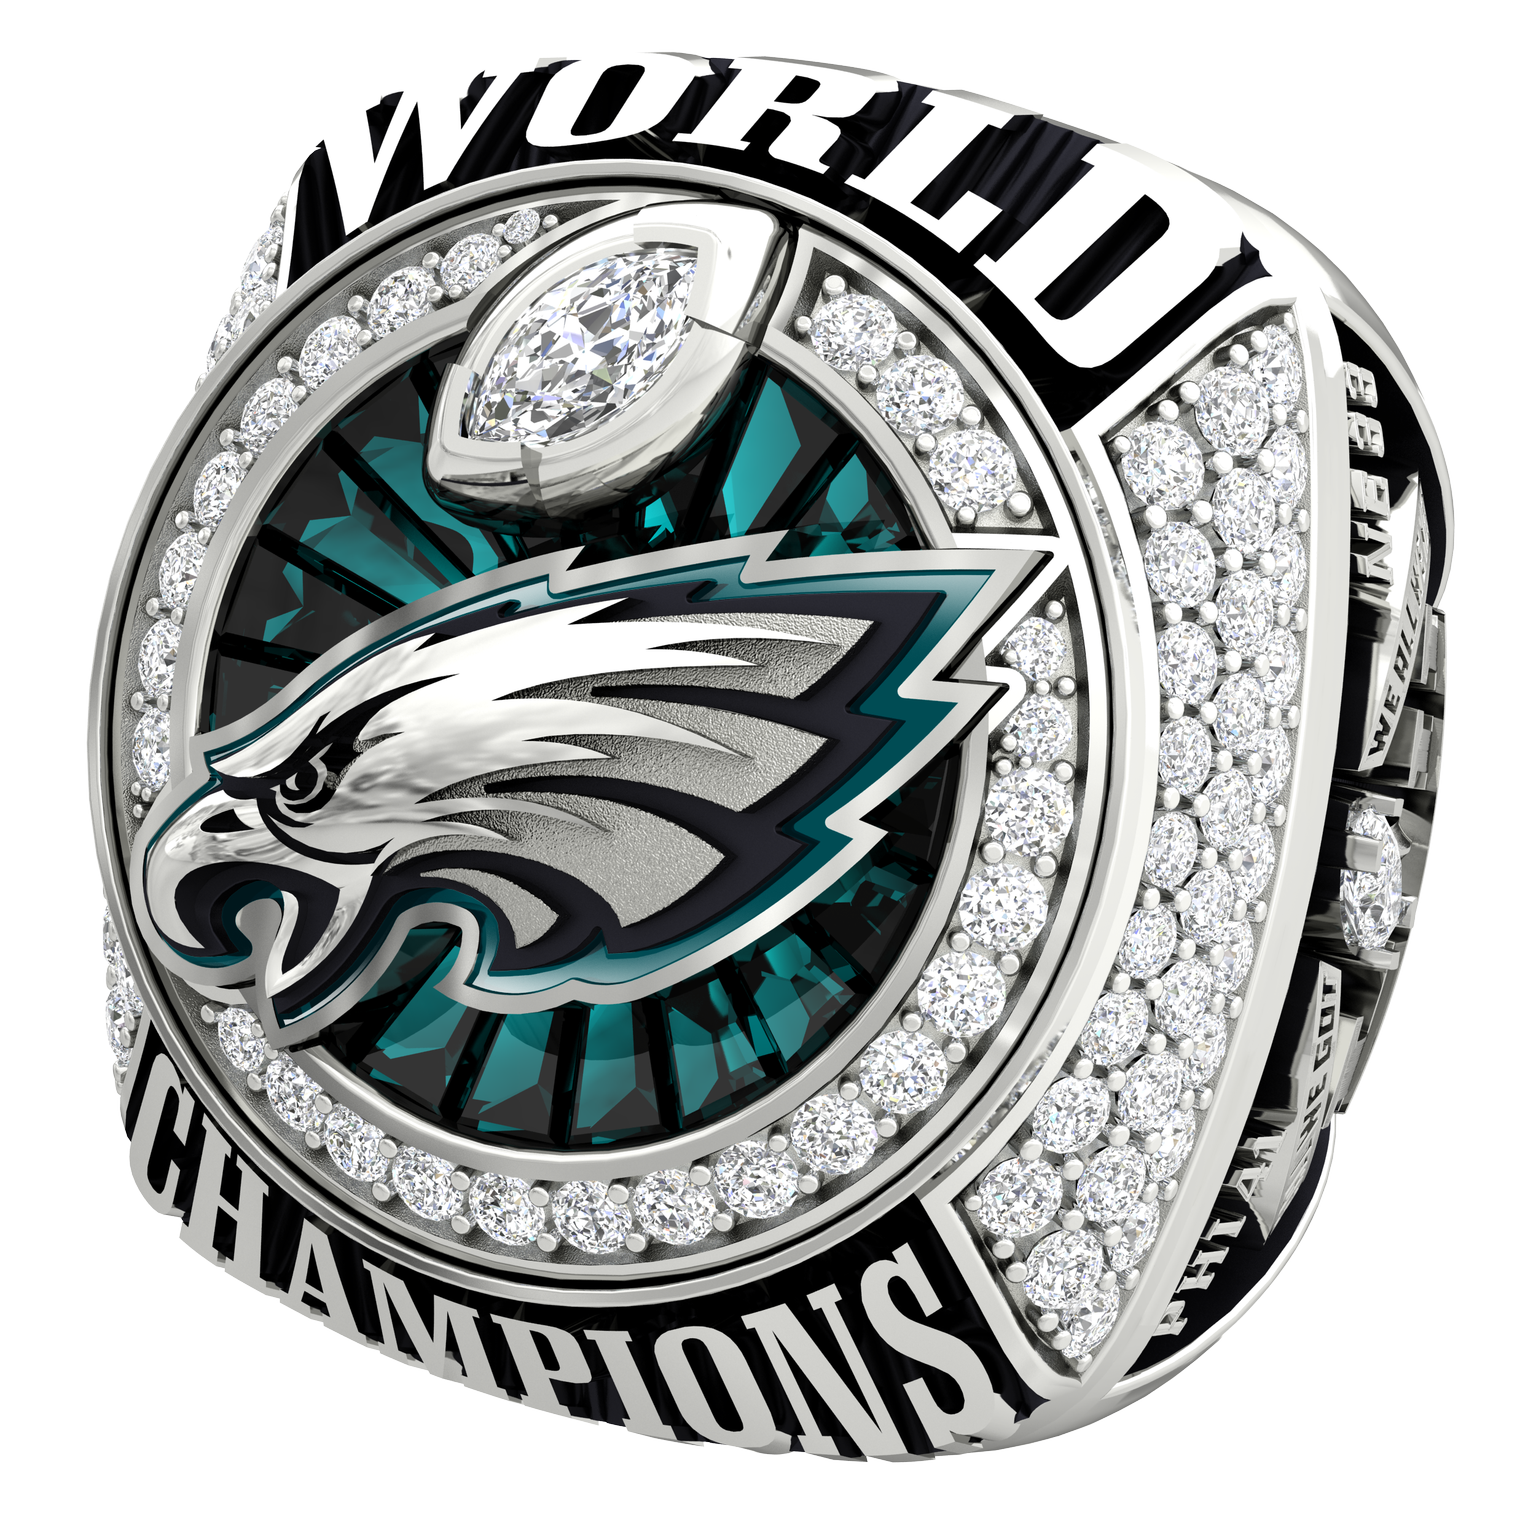 Super Bowl Ring and Trophy | EB Sports Championship Rings